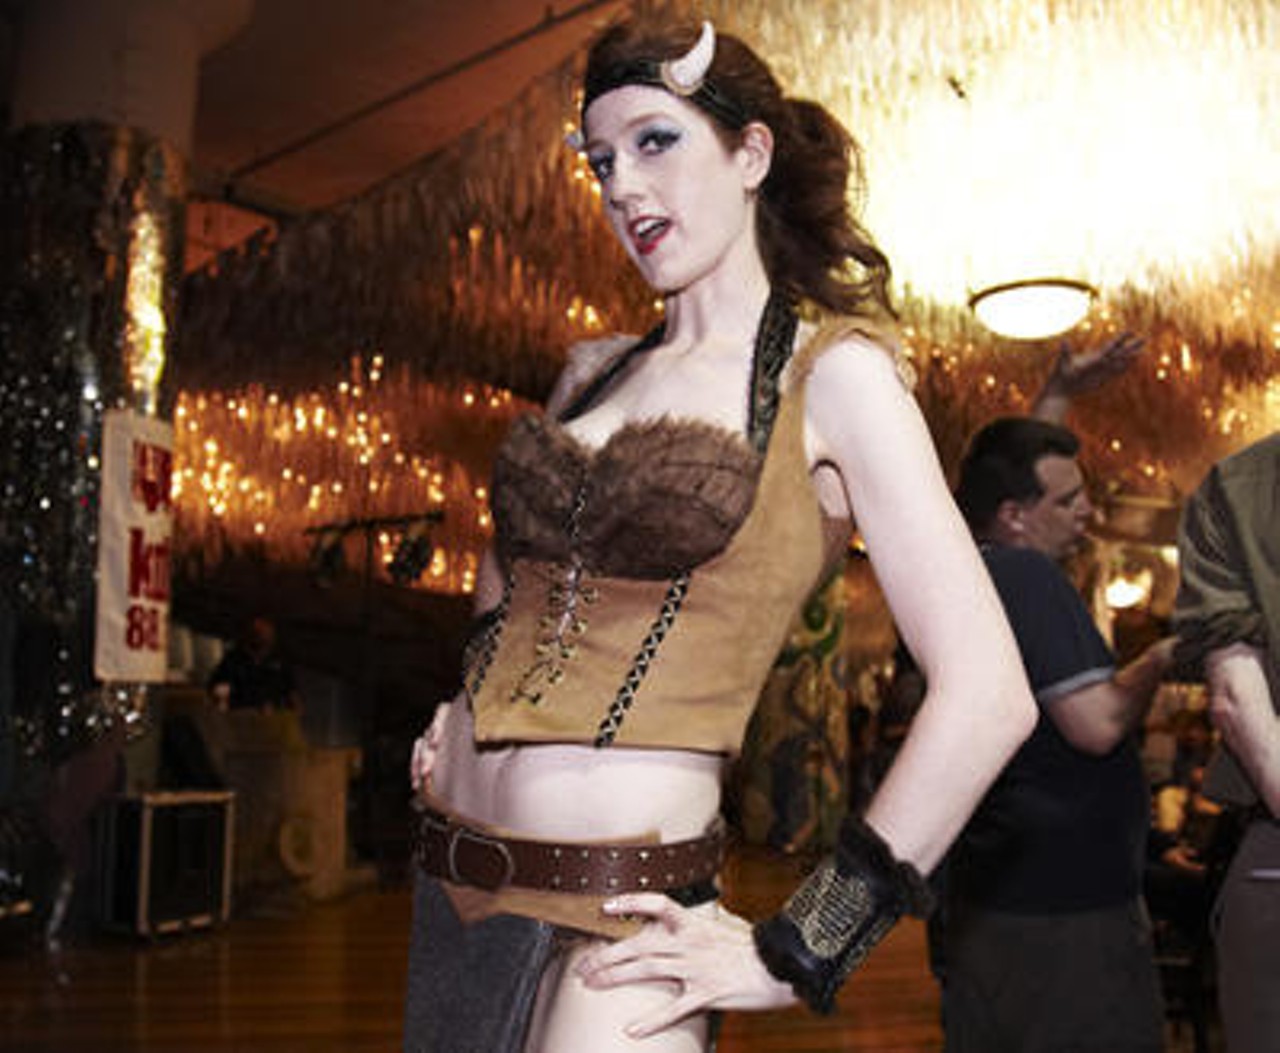 Bands and burlesque took over the City Museum on May 14. More photos.